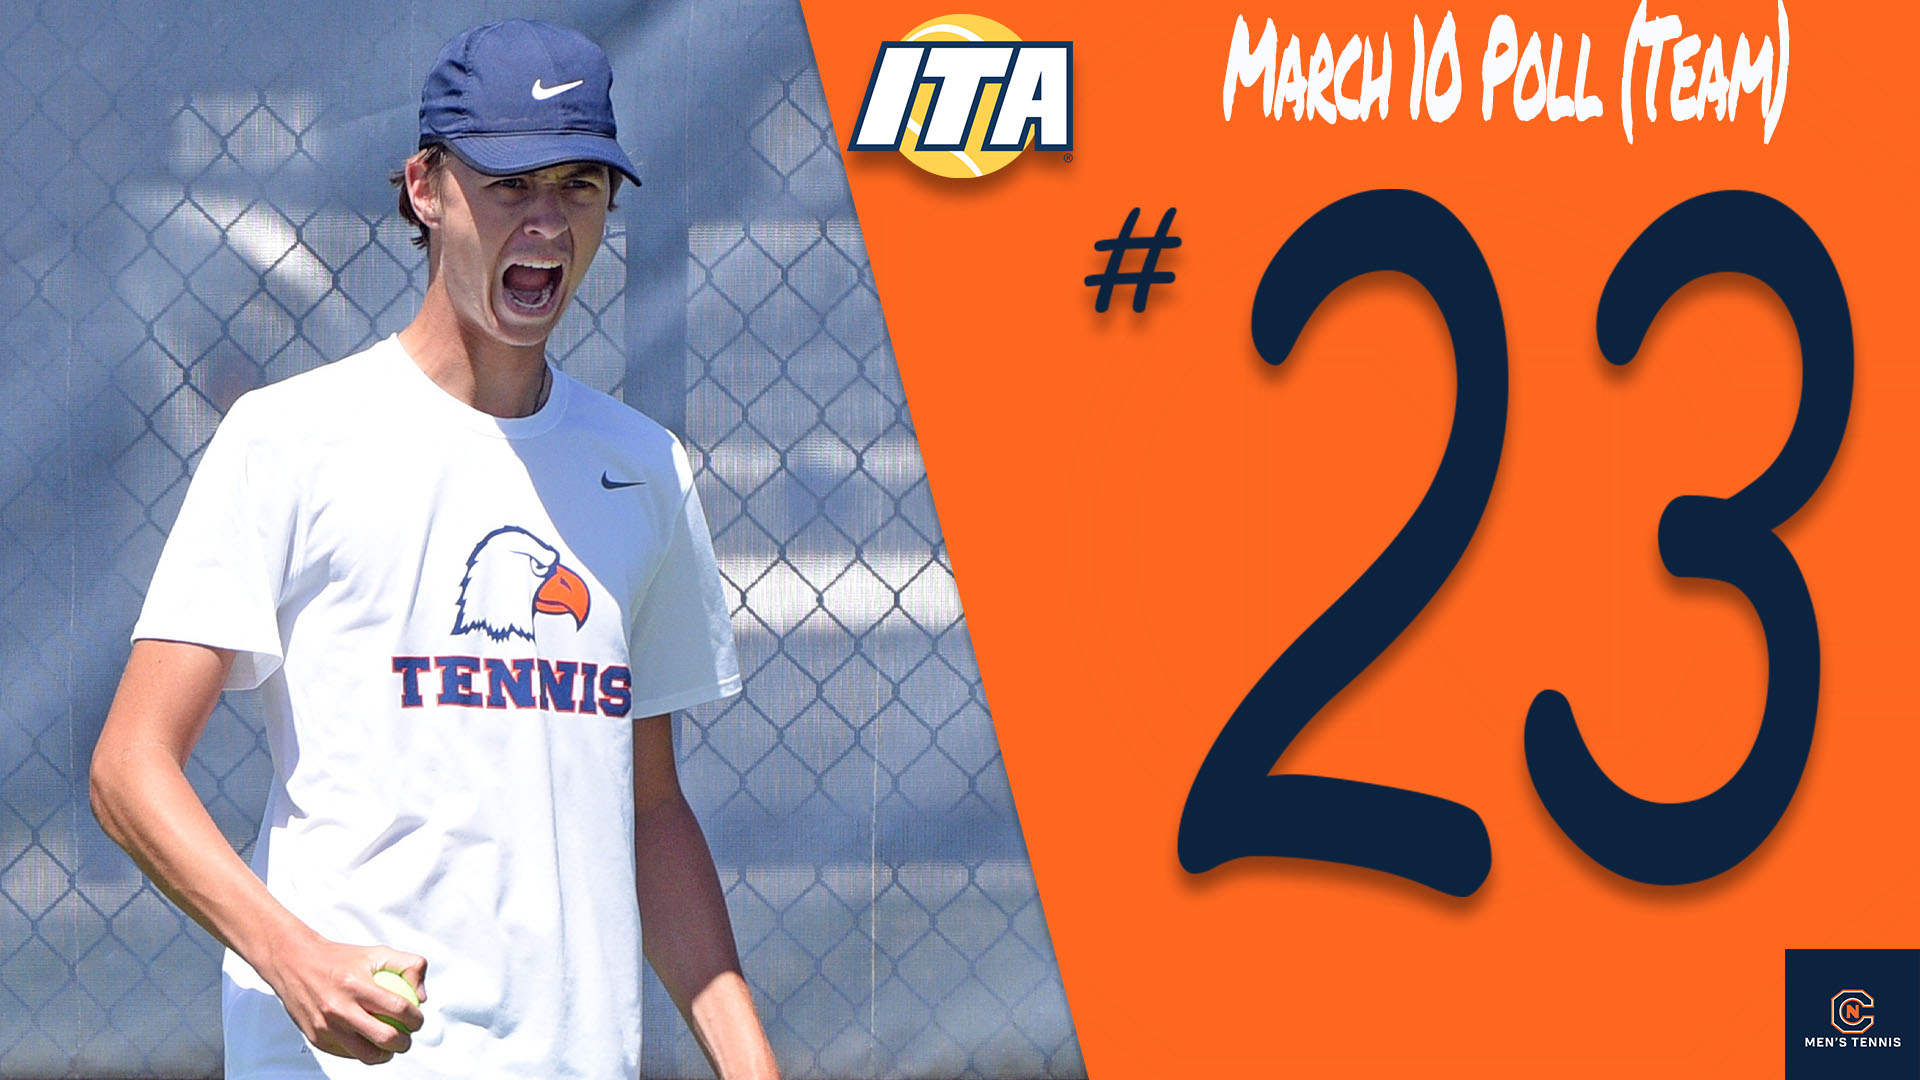 Eagles ranked in ITA top 50